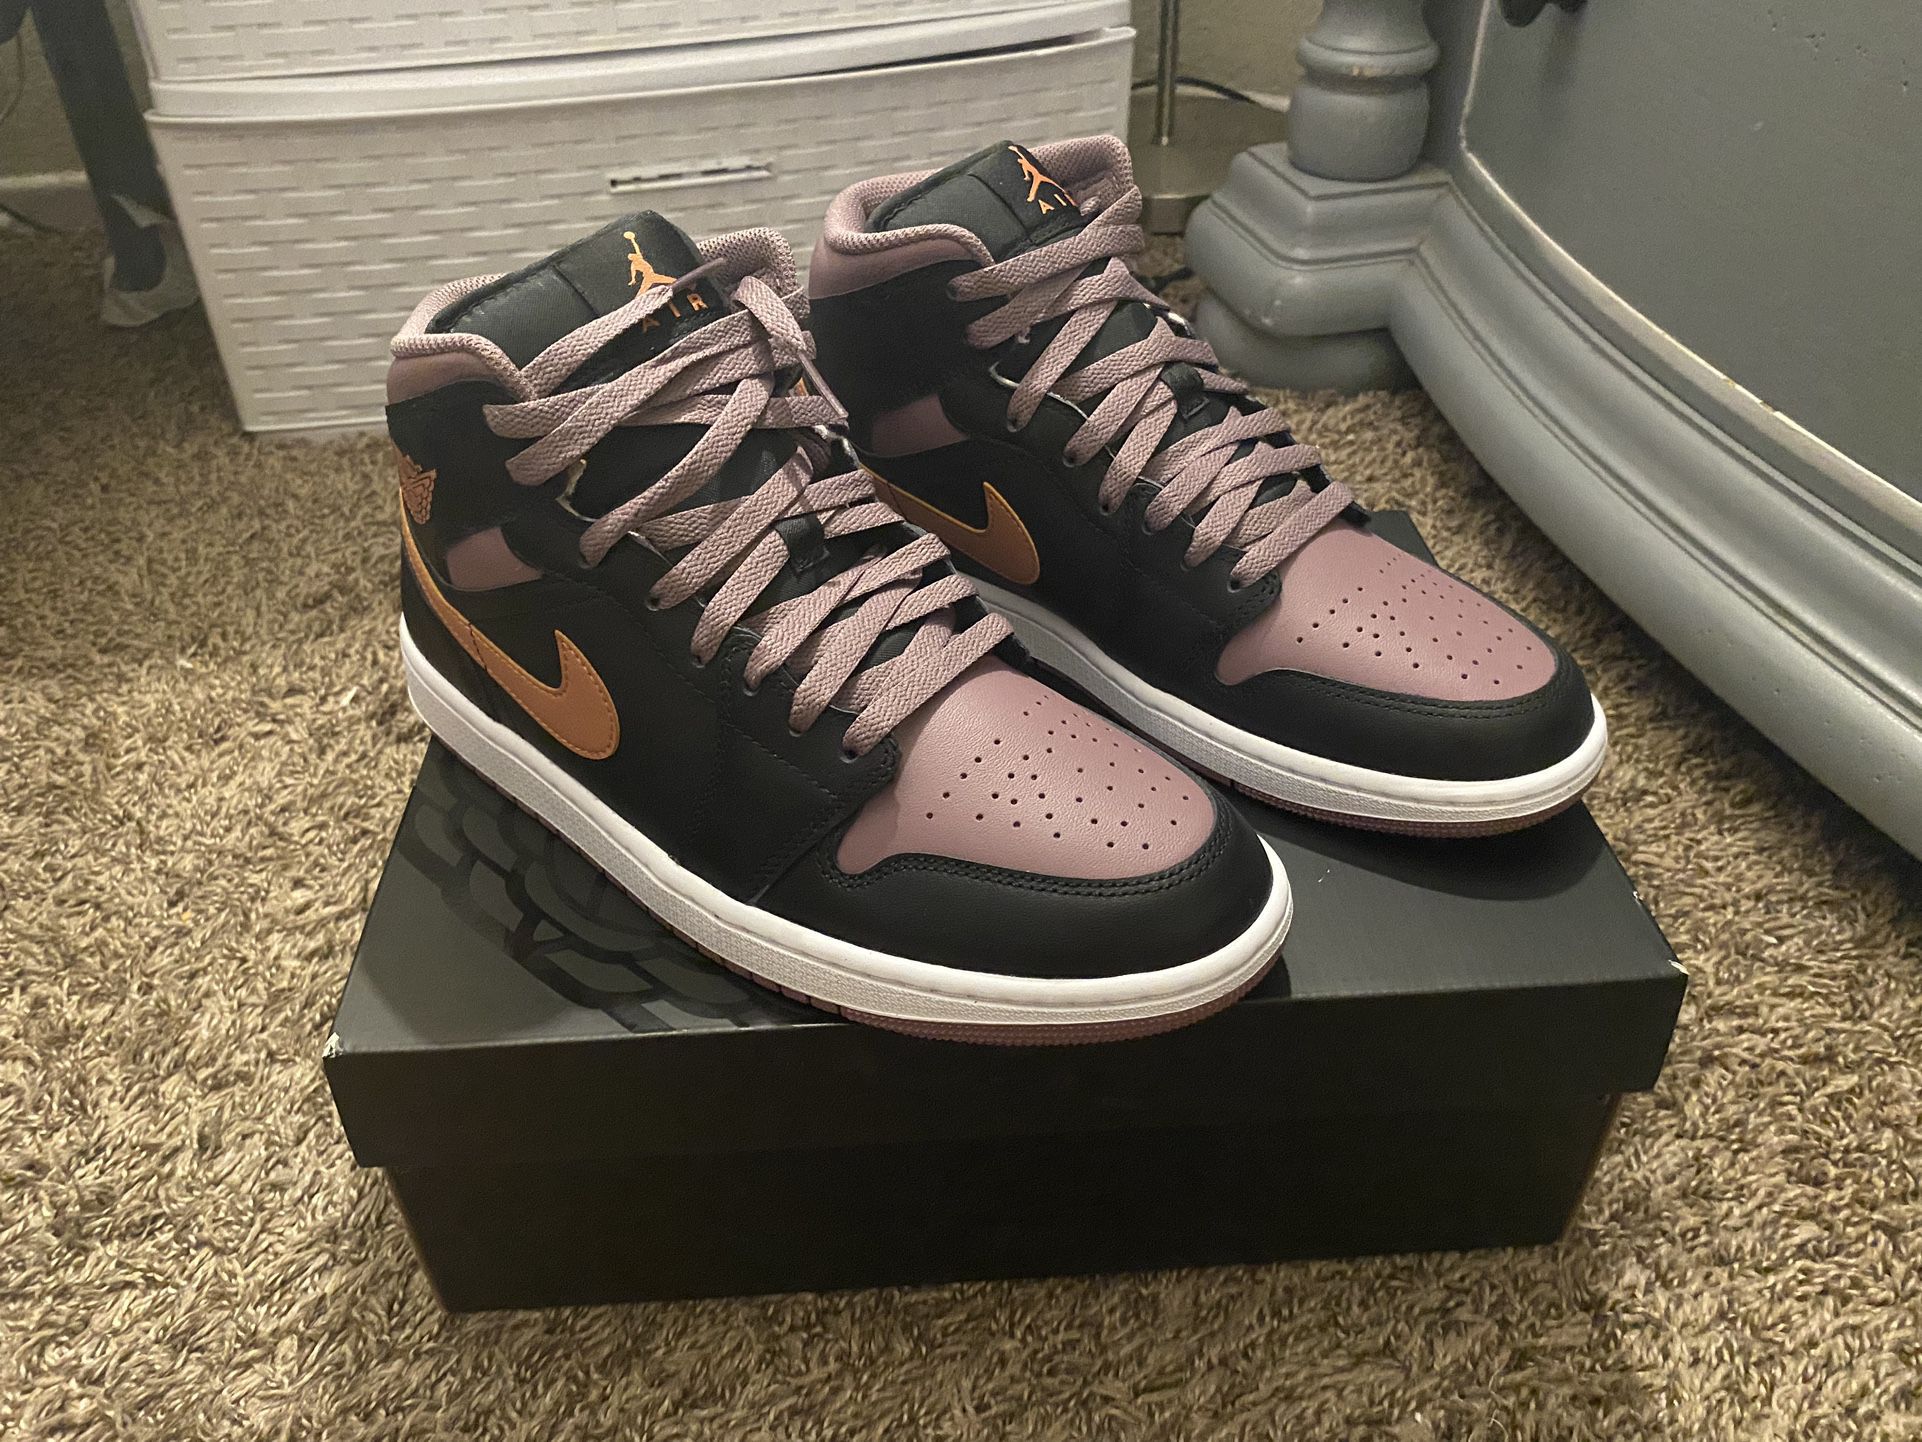 Air Jordan 1 Mid SE (Text Me, Im Just Trying To Get Rid Of Them)